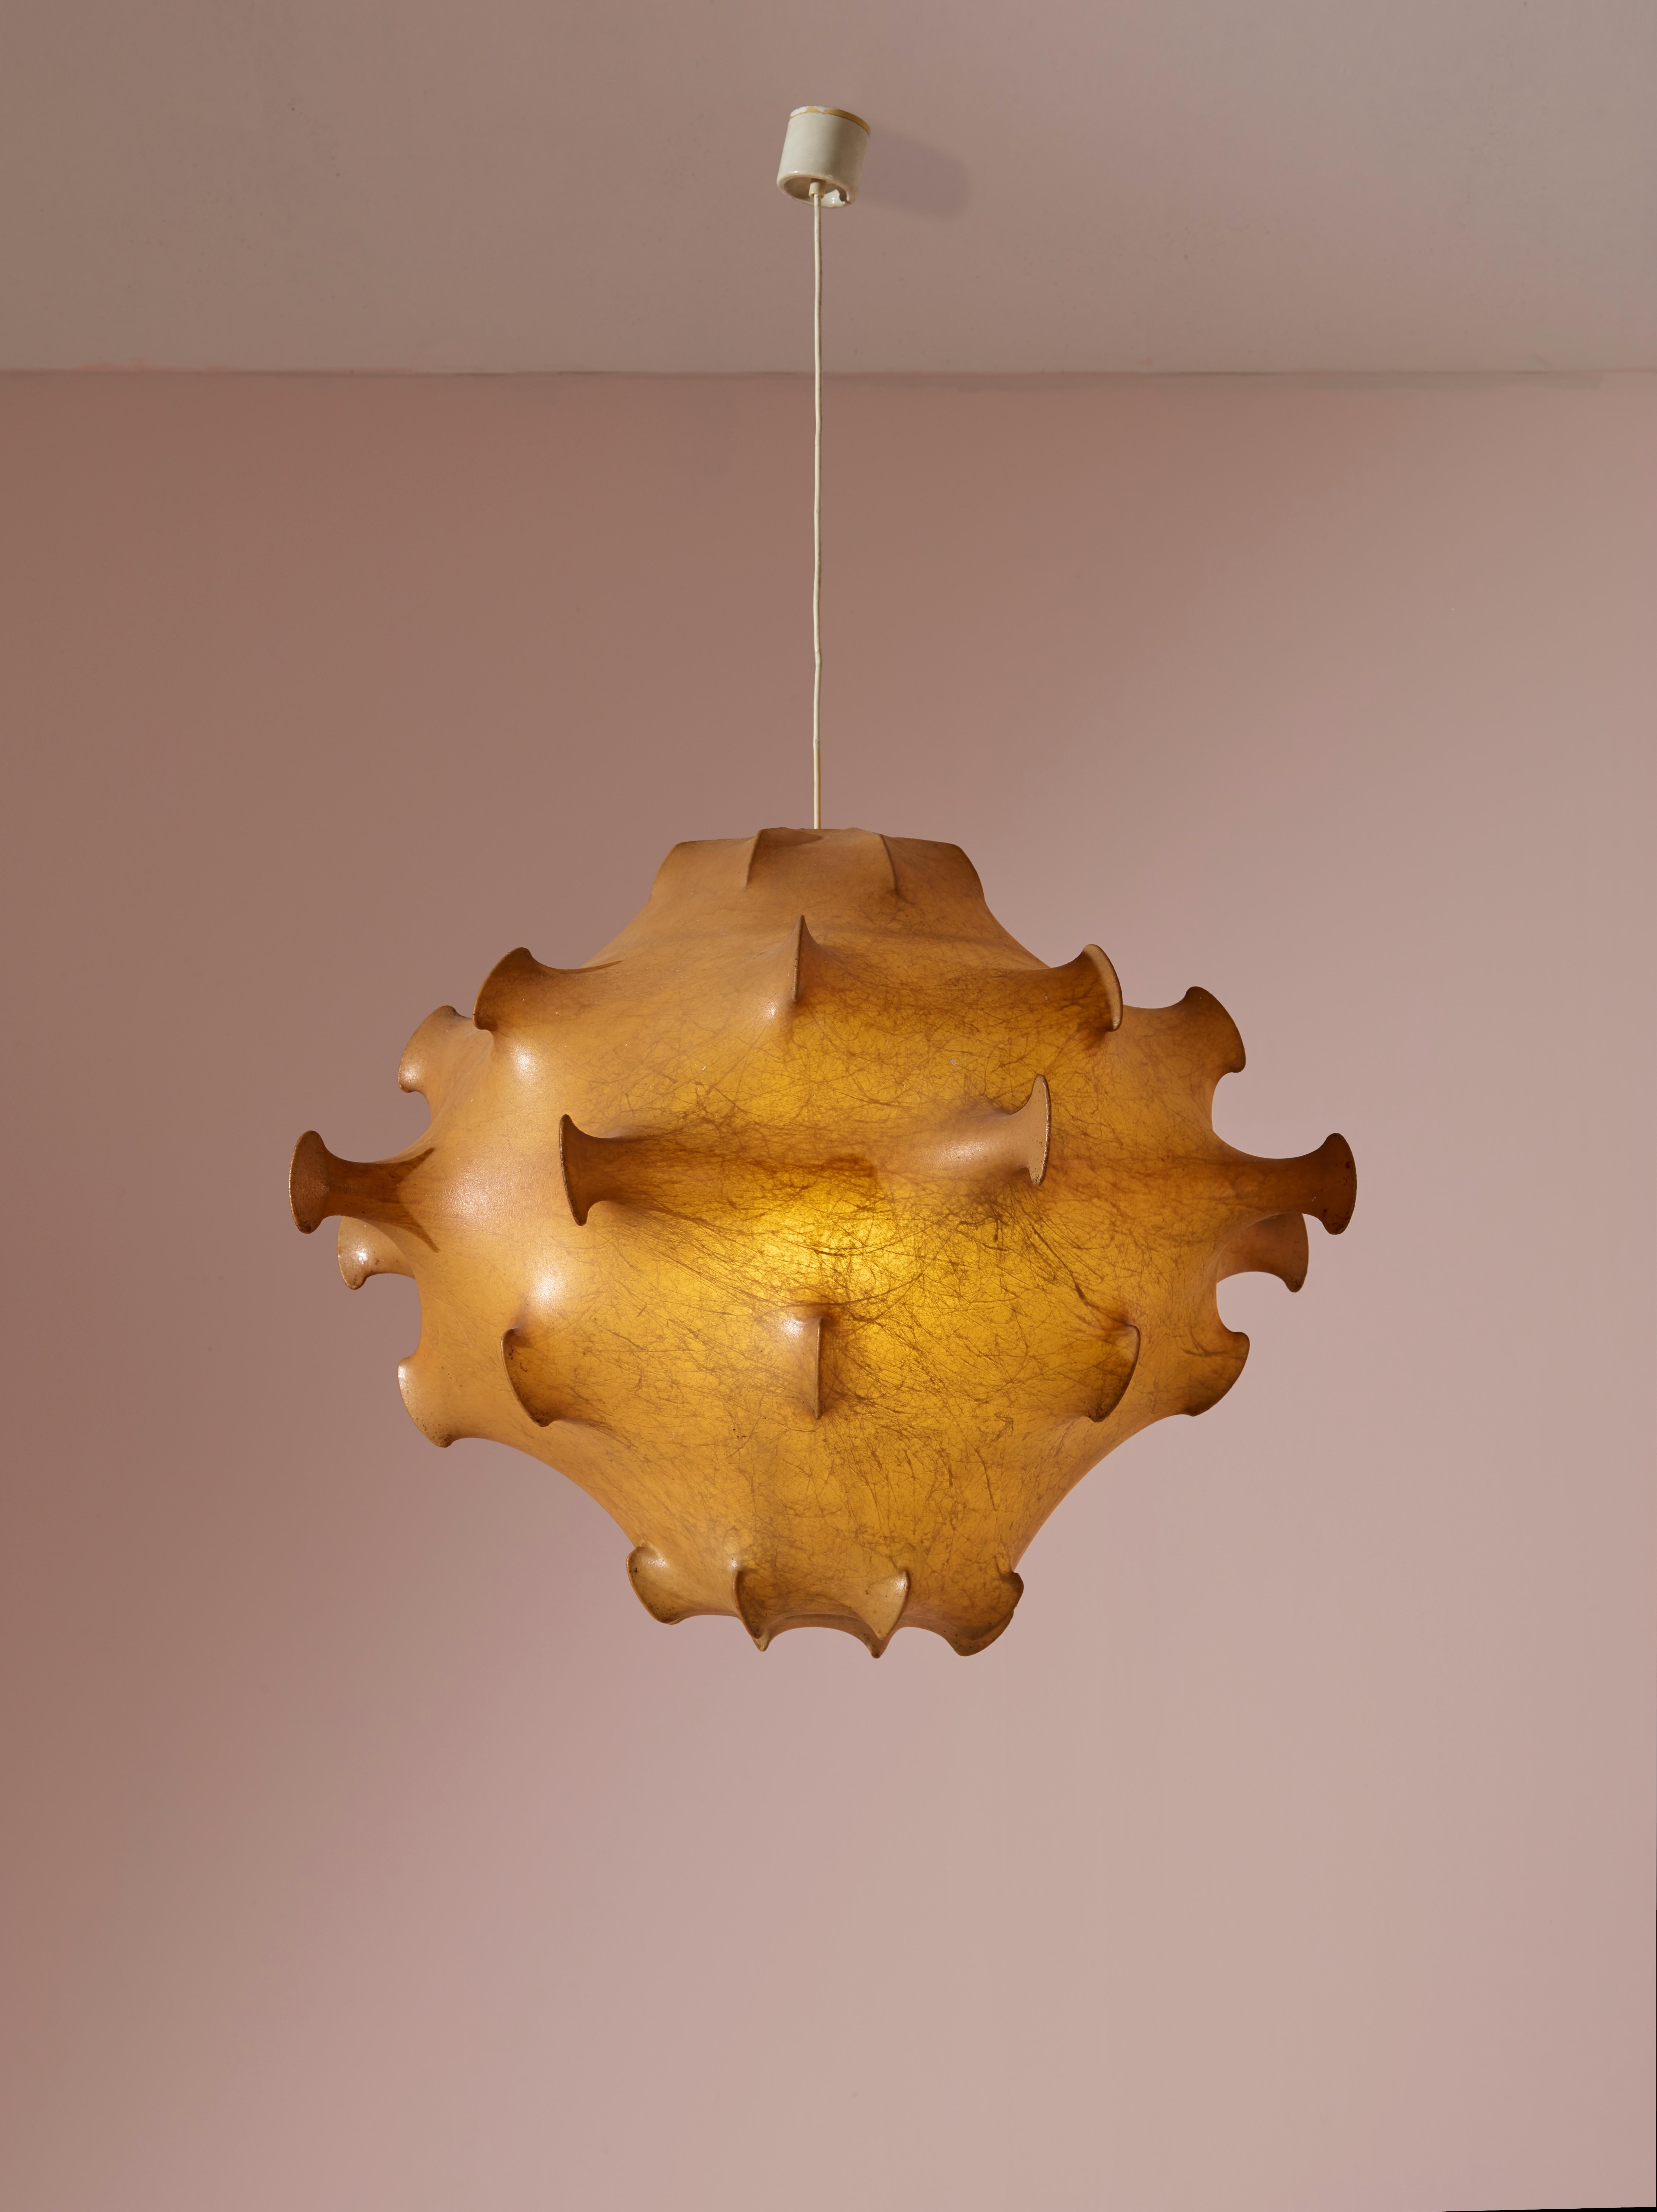 An original, vintage and in excellent condition ''Taraxacum 2'' cocoon suspension lamp designed in the 1960 by Achille and Pier Giacomo Castiglioni and manufactured by Flos in the same period.

With a diameter of 93cm, the lamp is designed using a